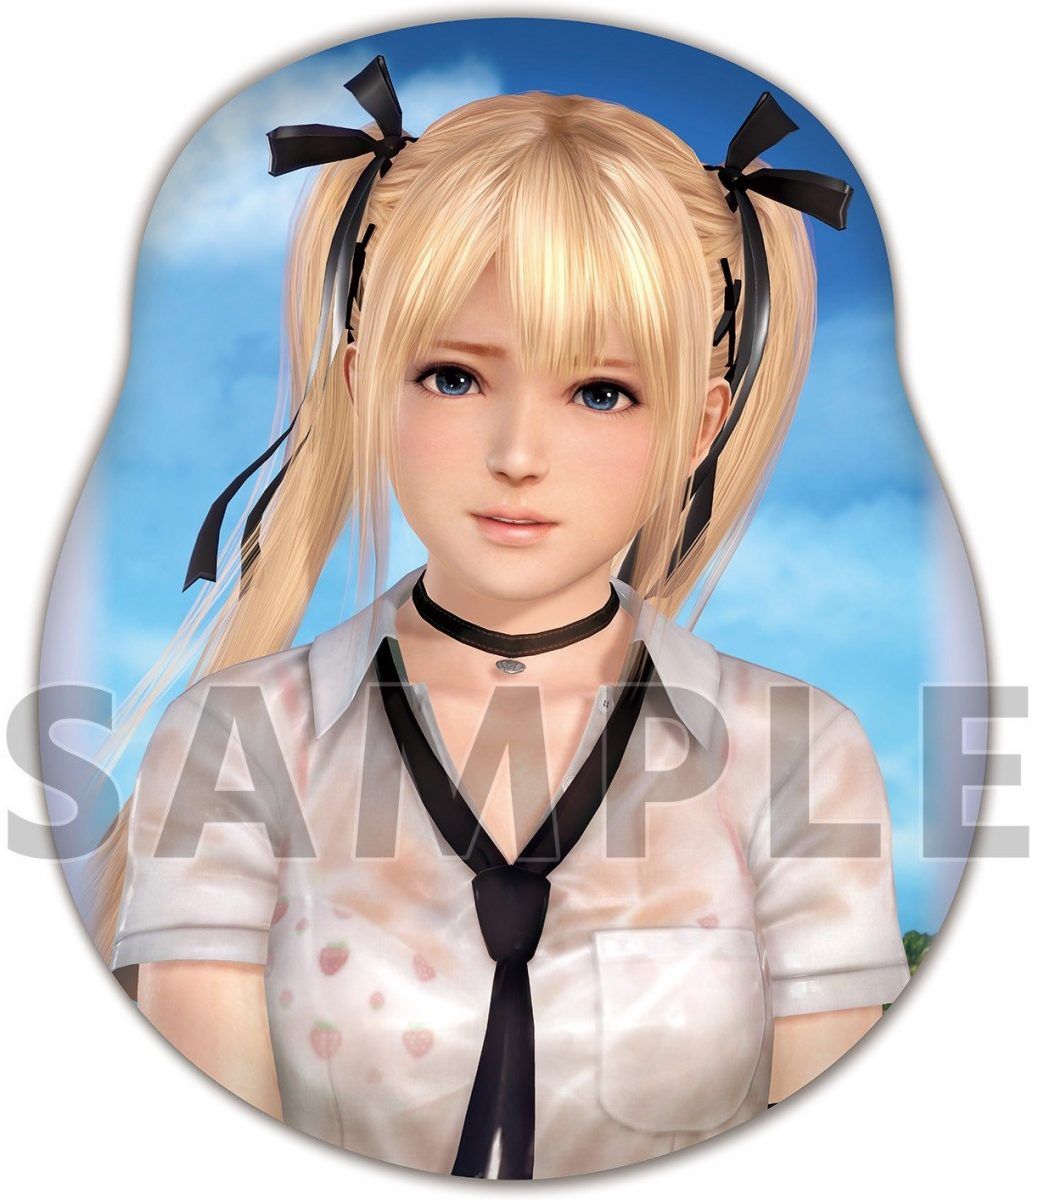 DEAD OR ALIVE Xtreme 3 Life Sized Mashumo